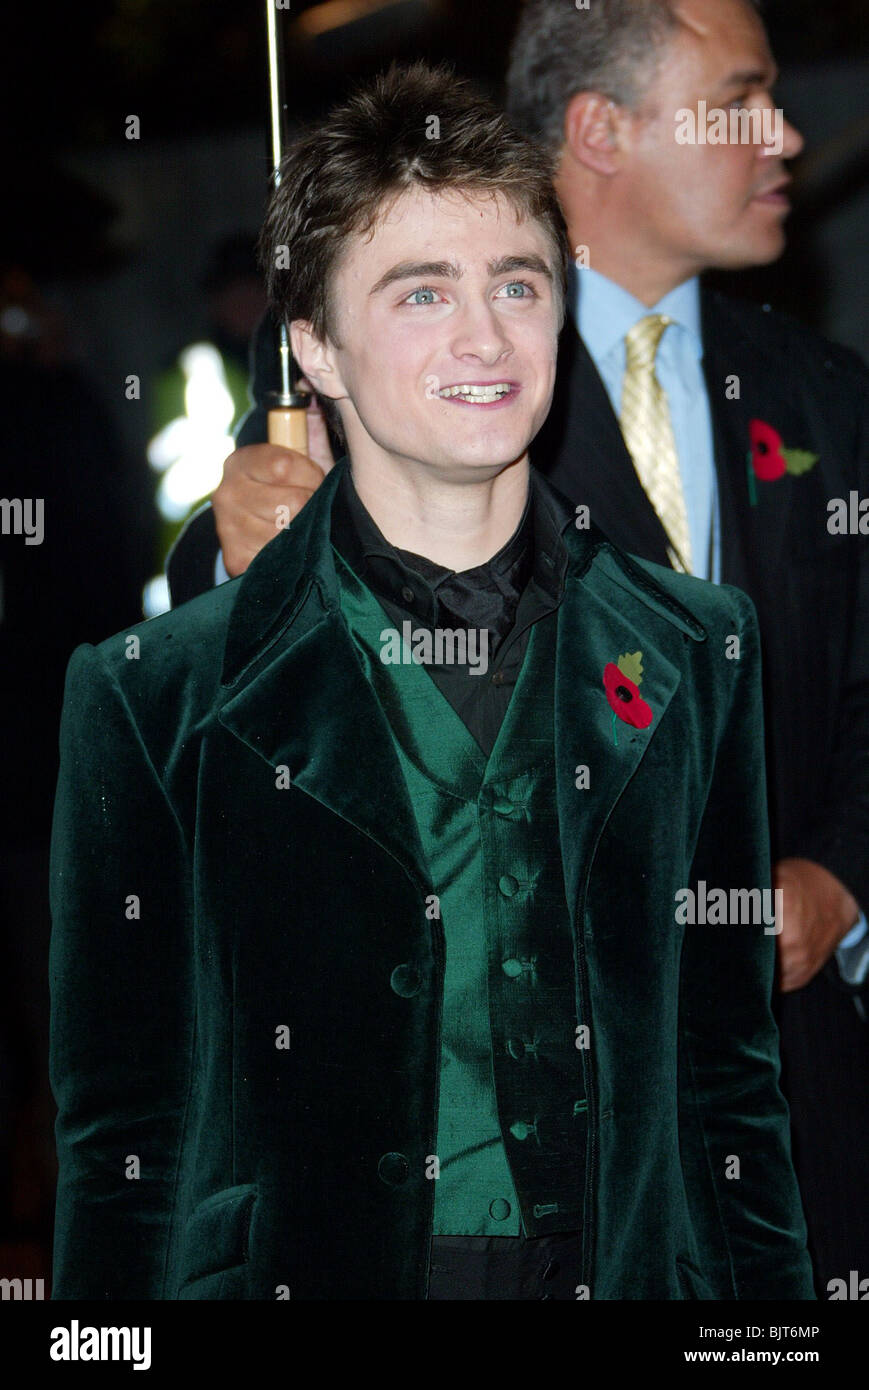 DANIEL RADCLIFFE HARRY POTTER & THE GOBLET OF FIRE FILM PREMIER ODEON LEICESTER SQUARE LONDON ENGLAND 06 November 2005 Stock Photo